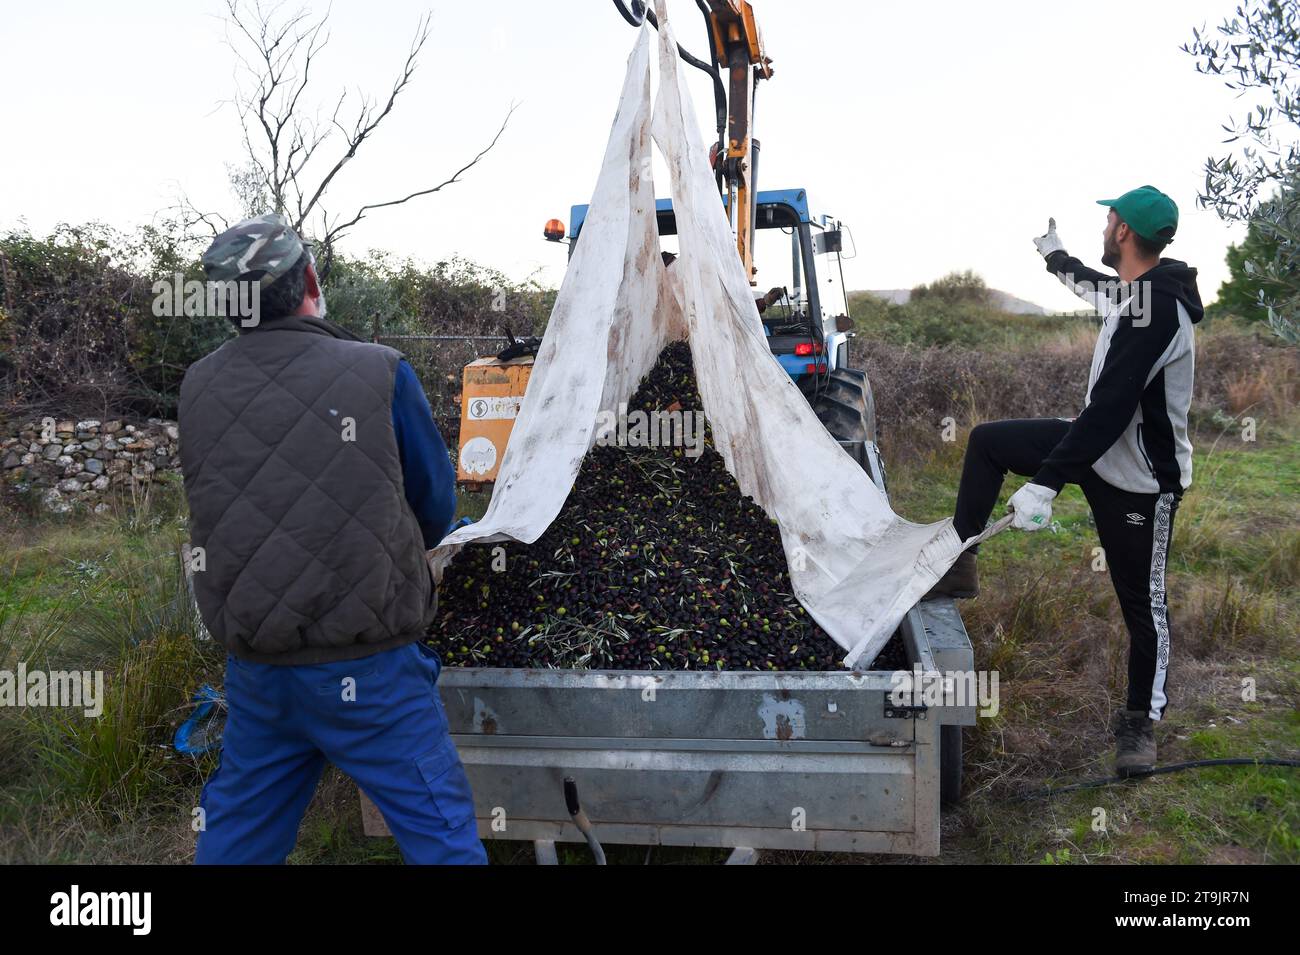 Caceres, Spain. 24th Nov, 2023. People harvest olives in Caceres, Spain, Nov. 24, 2023. Spain is one of the largest olive oil producers in the world. However, heat waves and droughts this year have slashed the country's olive output, which in turn pushed up the price of olive oil products on the market. Credit: Gustavo Valiente/Xinhua/Alamy Live News Stock Photo